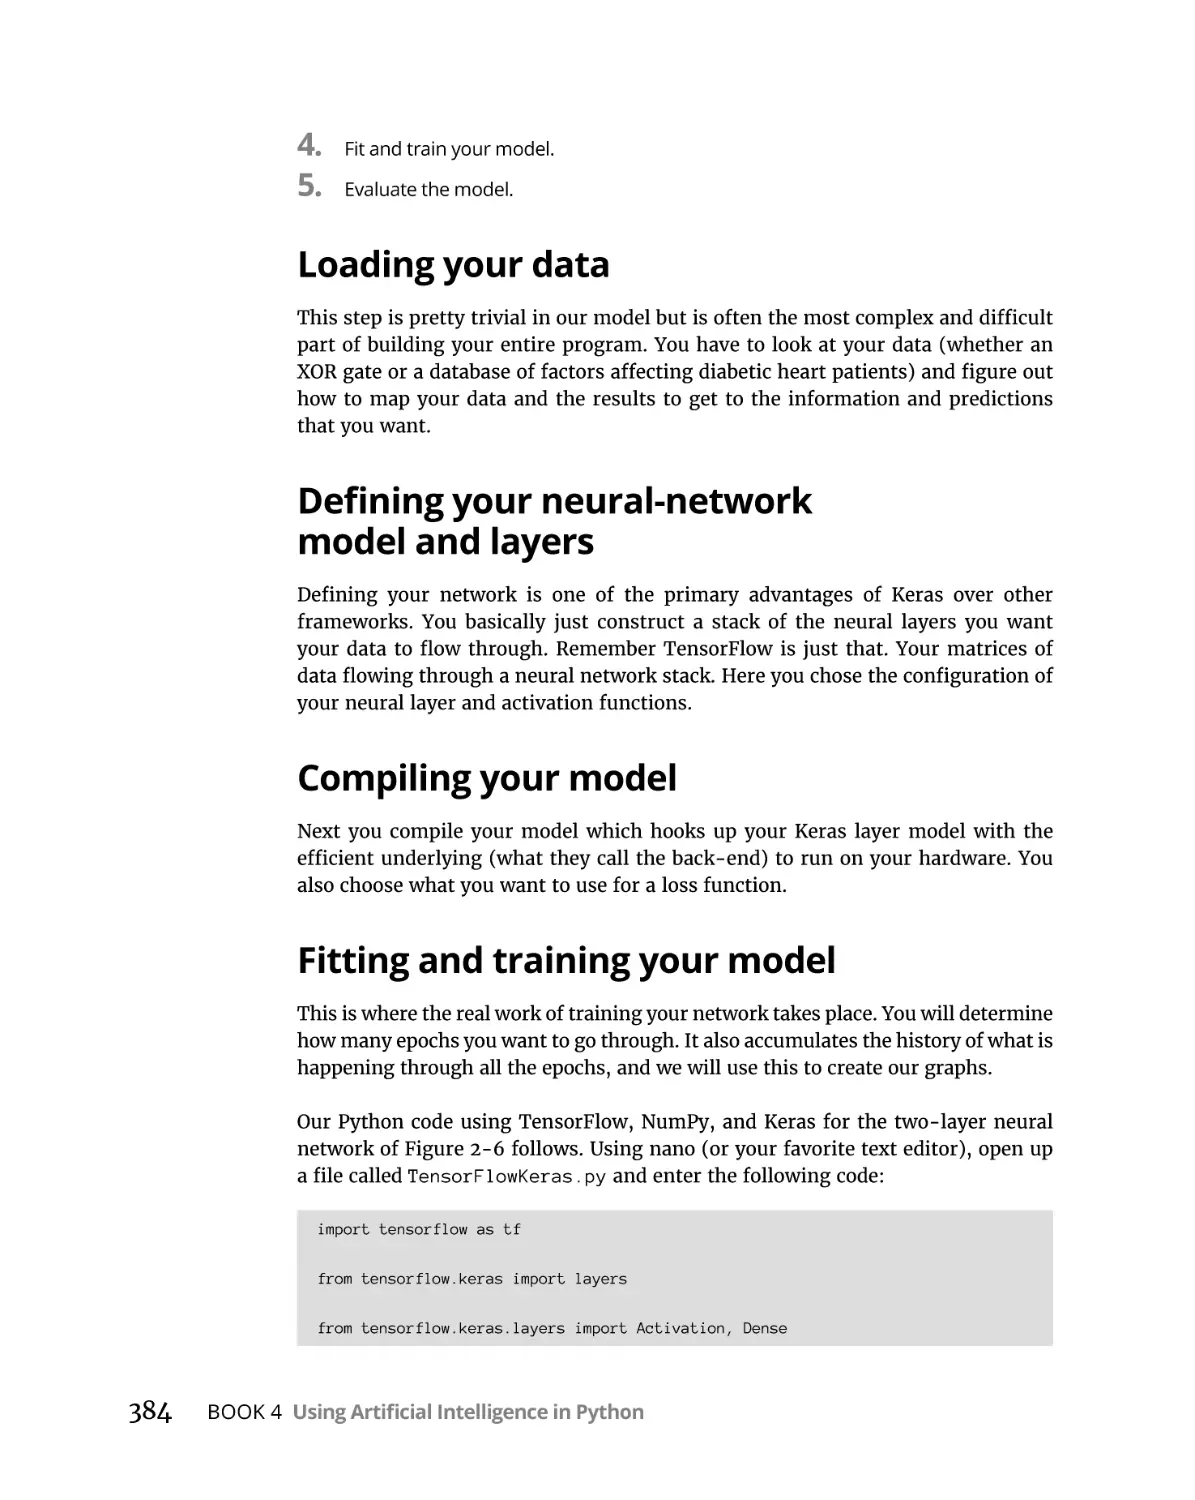 Loading your data
Defining your neural-network model and layers
Compiling your model
Fitting and training your model